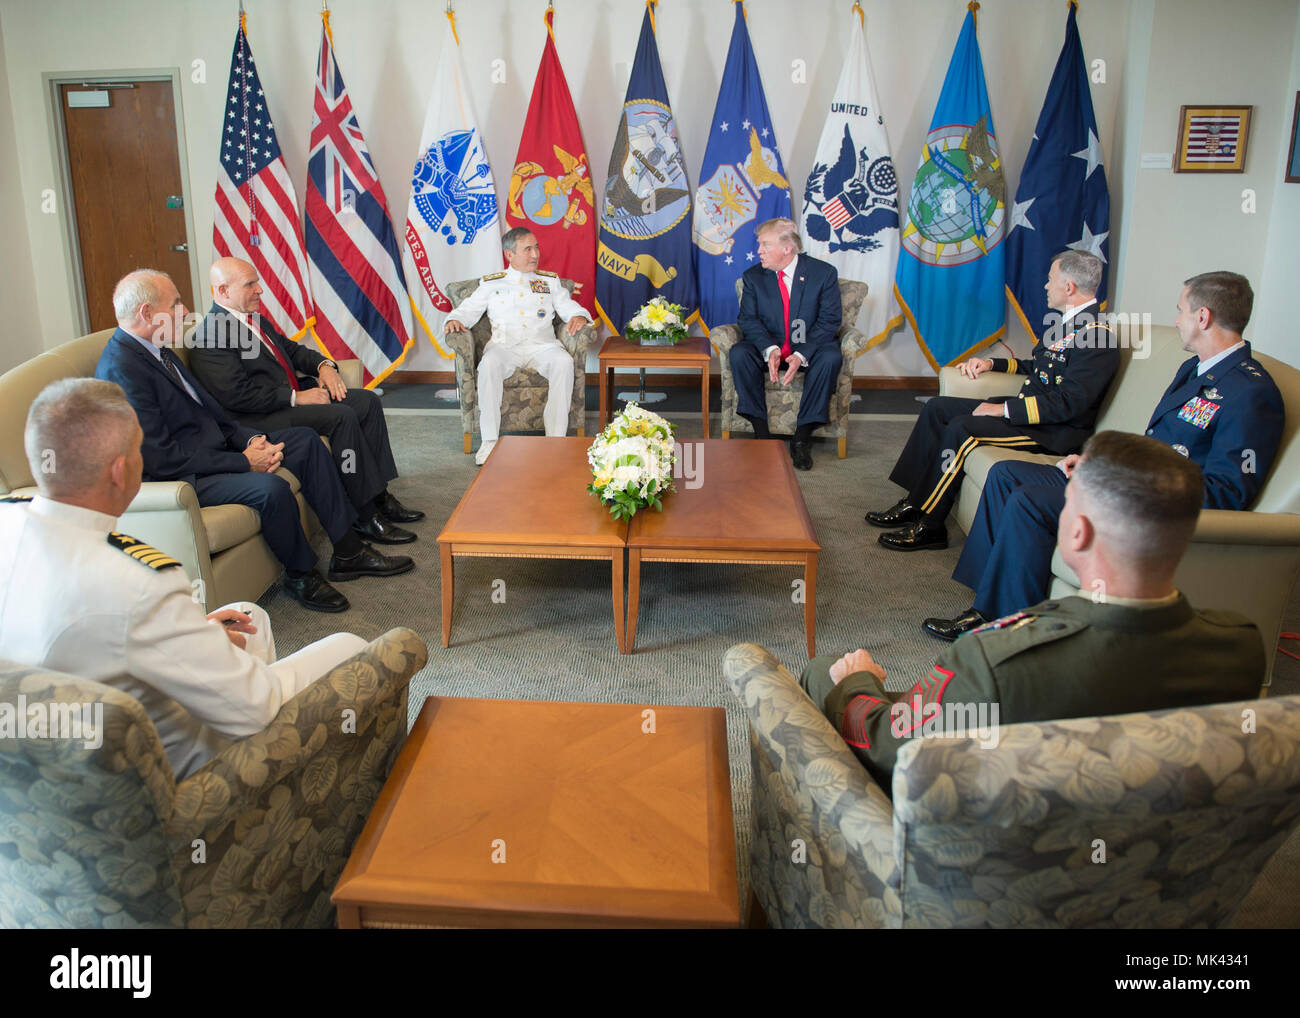 171103-N-WY954-092 CAMP H.M. SMITH, Hawaii (Nov. 3, 2017)— President Donald J. Trump and U.S. Pacific Command (USPACOM) Commander, Adm. Harry Harris, sit down for a meeting at USPACOM headquarters.  The President is in Hawaii to receive a briefing from USPACOM prior to traveling to Japan, the Republic of Korea, China, Vietnam and the Philippines from November 3-14. During the trip the President will underscore his commitment to longstanding U.S. alliances and partnerships, and reaffirm U.S. leadership in promoting a free and open Indo-Asia-Pacific region. The president’s engagements will stren Stock Photo